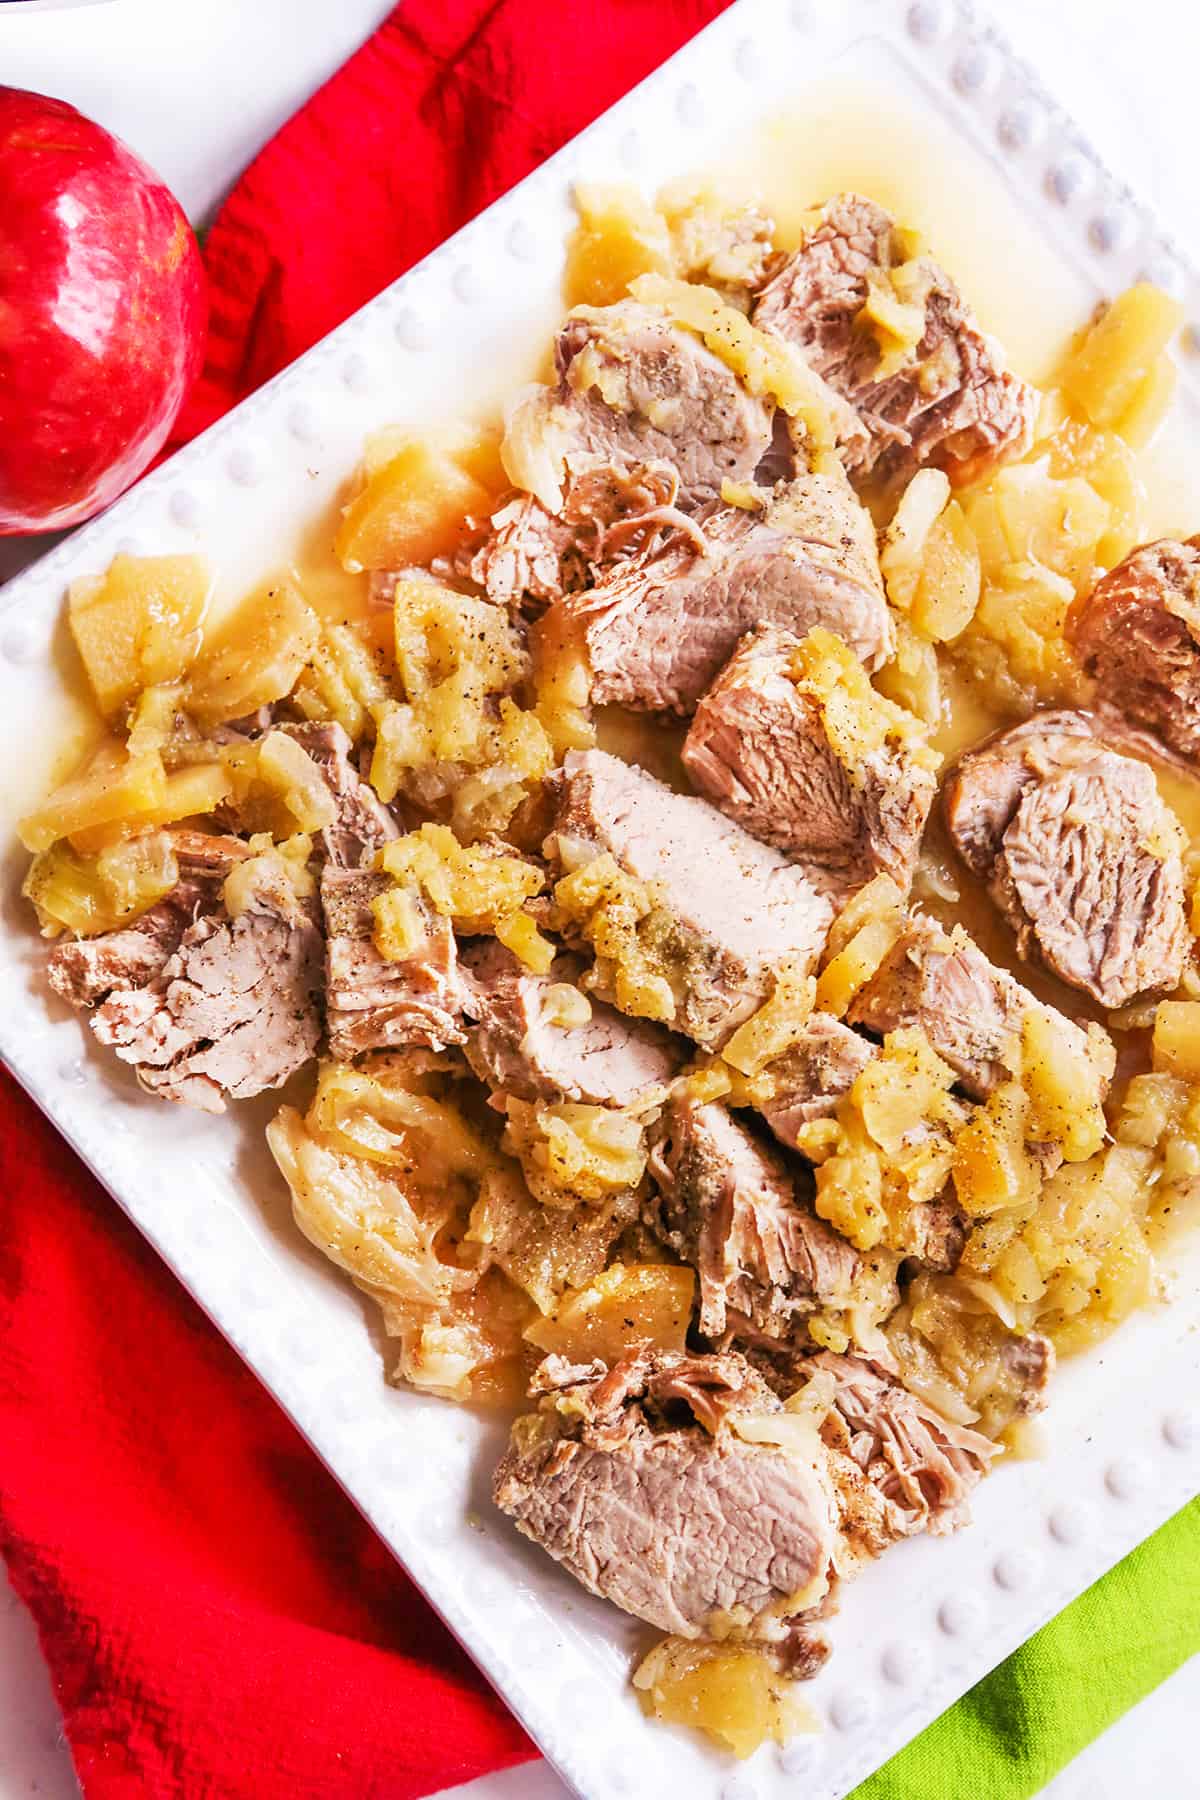 Looking down on on a platter with shredded pork and apples.